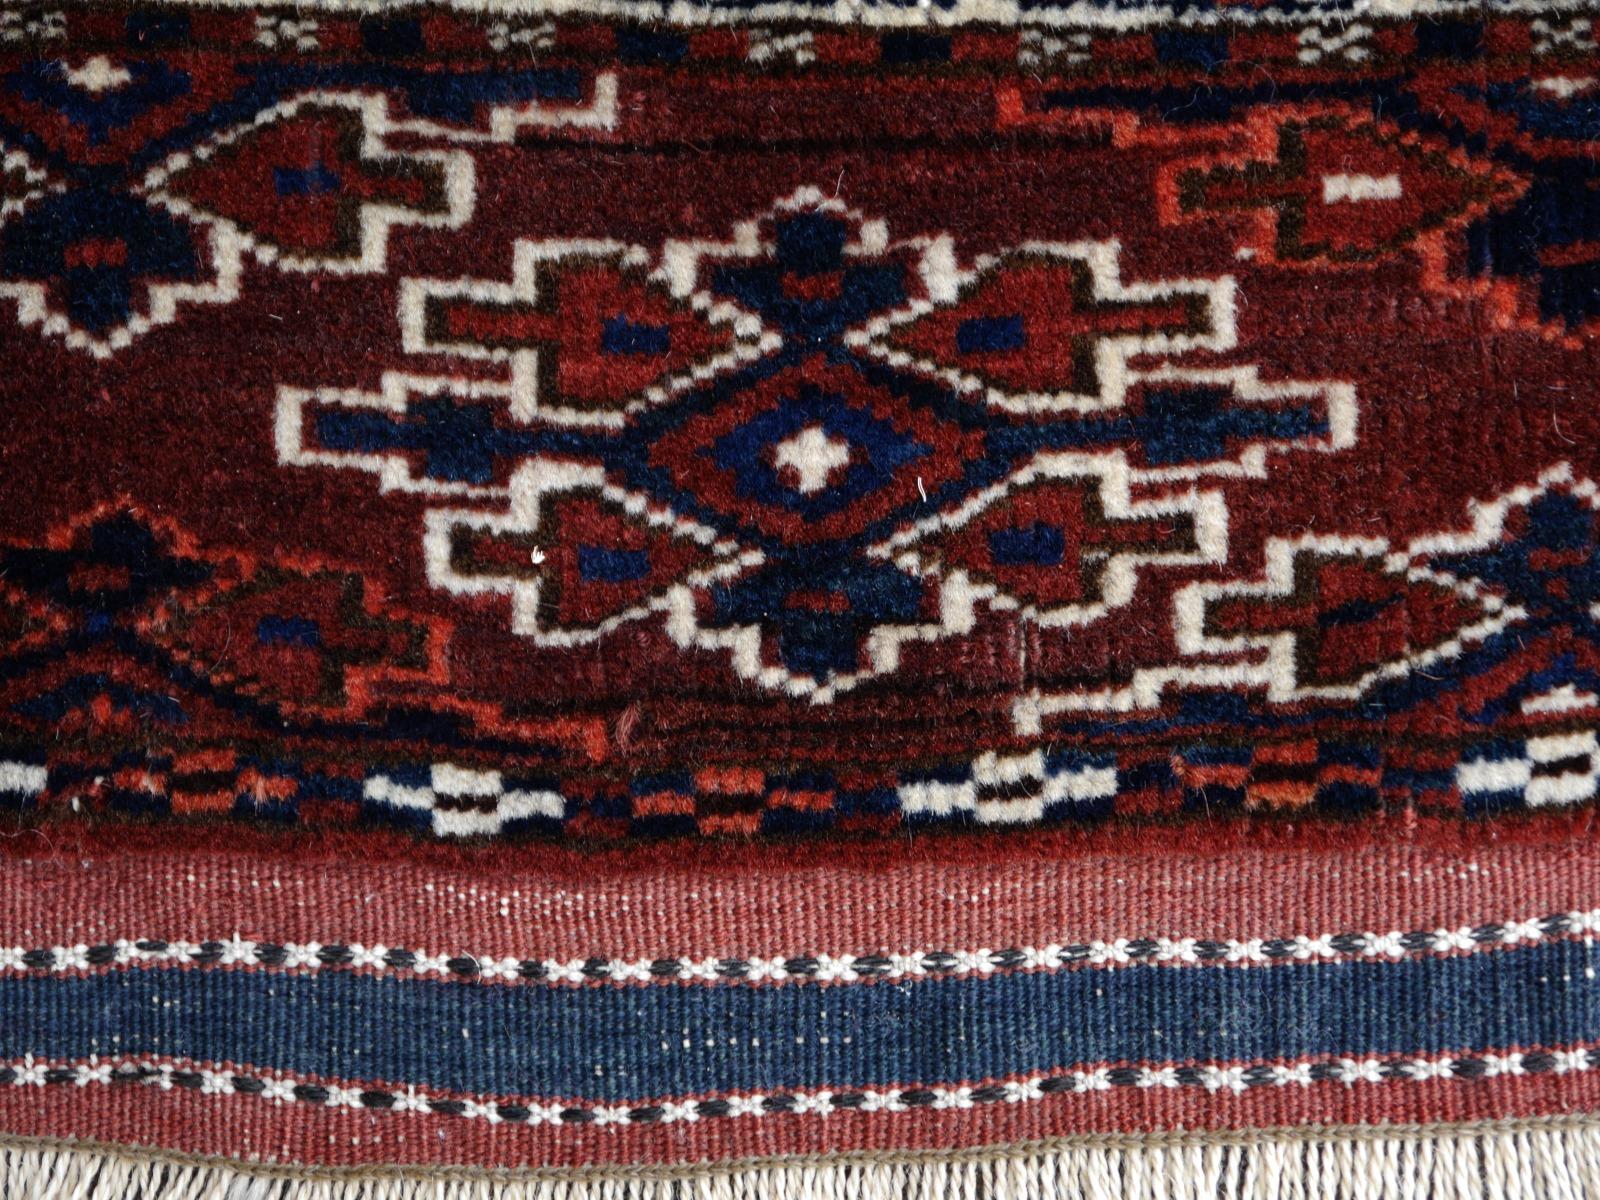 Yomud Tribeal Turkmen Turkoman Antique Rug with Ram Motive Hand Knotted Carpet For Sale 6